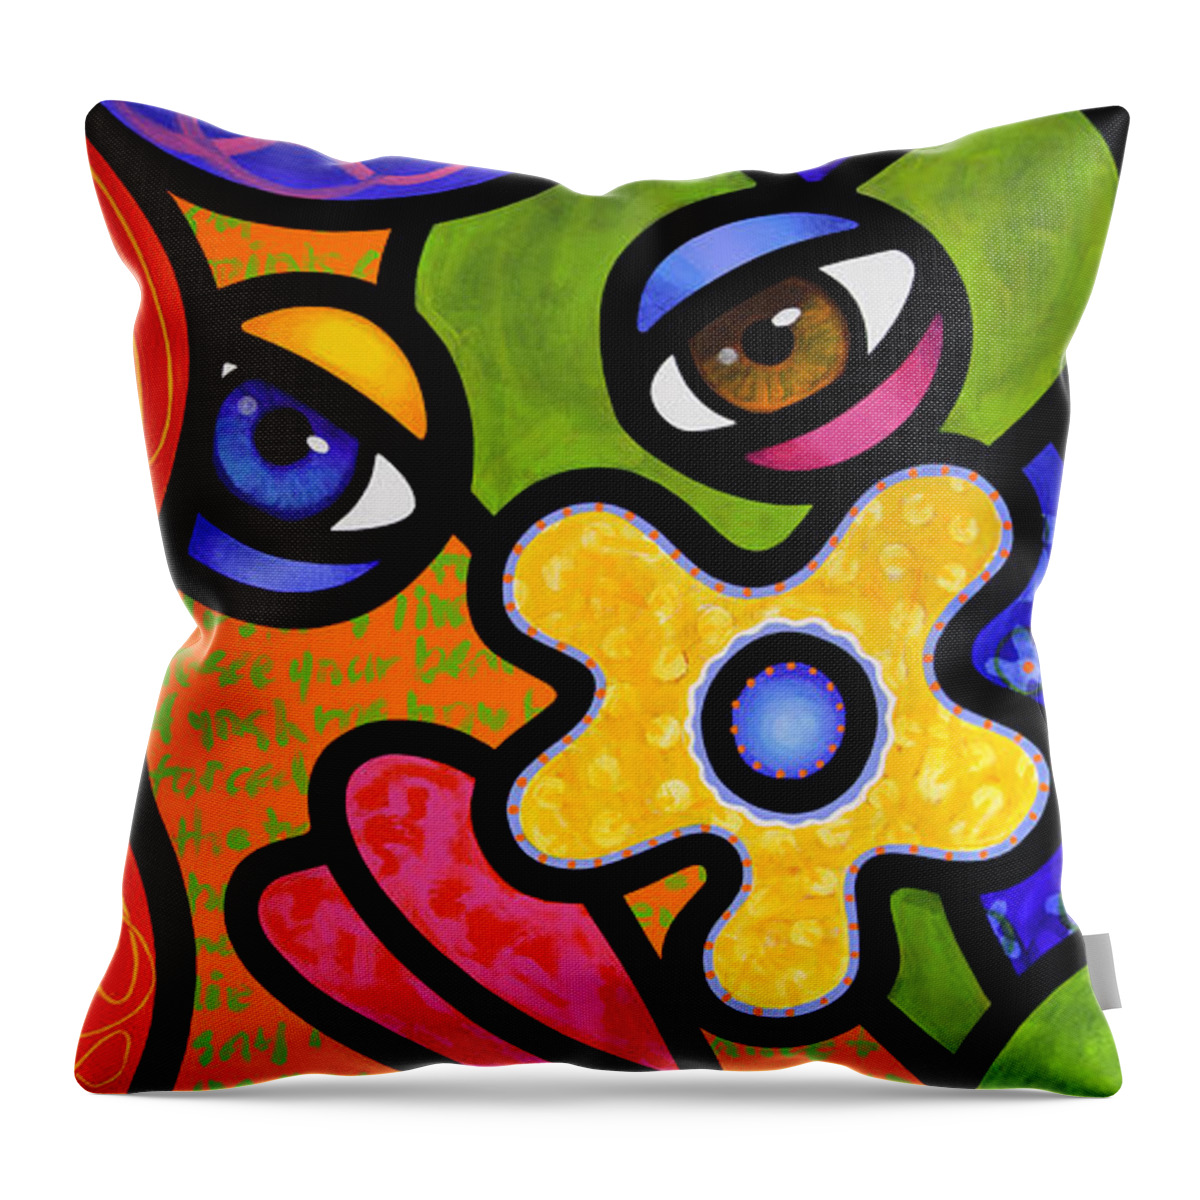 Abstract Throw Pillow featuring the painting Double Take by Steven Scott